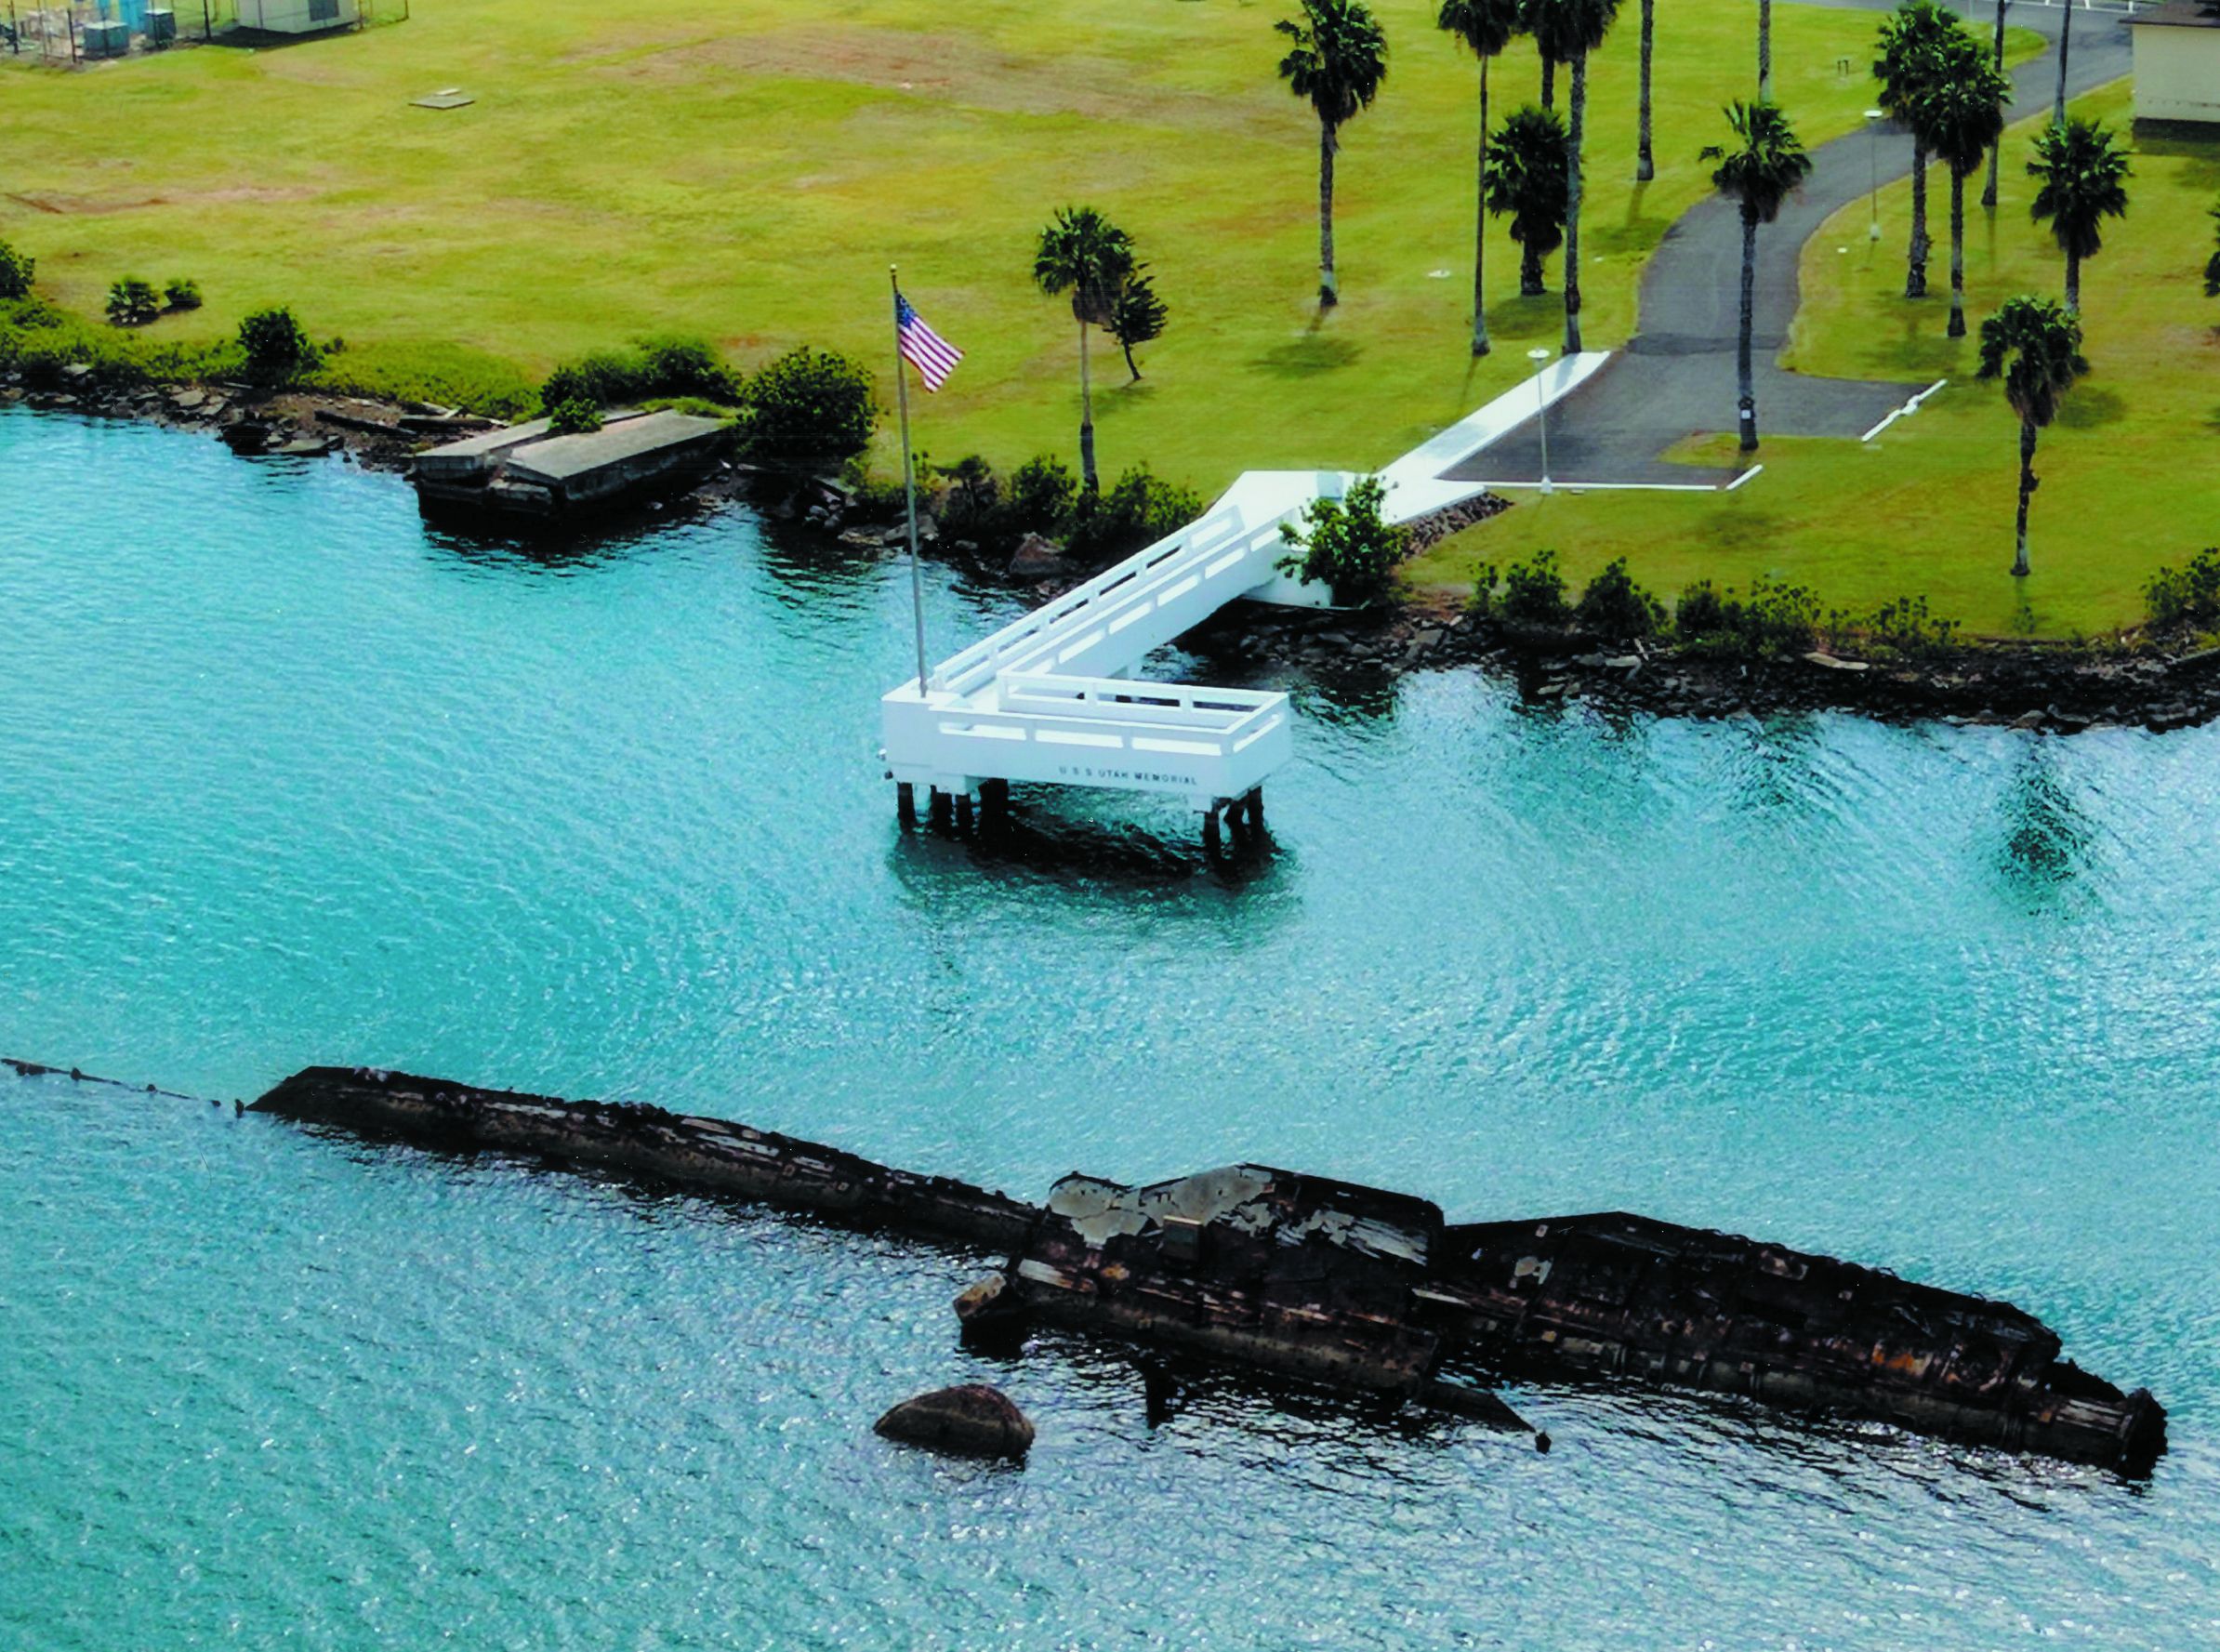 Overshadowed by the stately memorial to the USS Arizona less than a mile away, the simple memorial constructed at the grave of the USS Utah in 1972 commemorates the 54 sailors who lost their lives aboard the vessel on December 7, 1941.